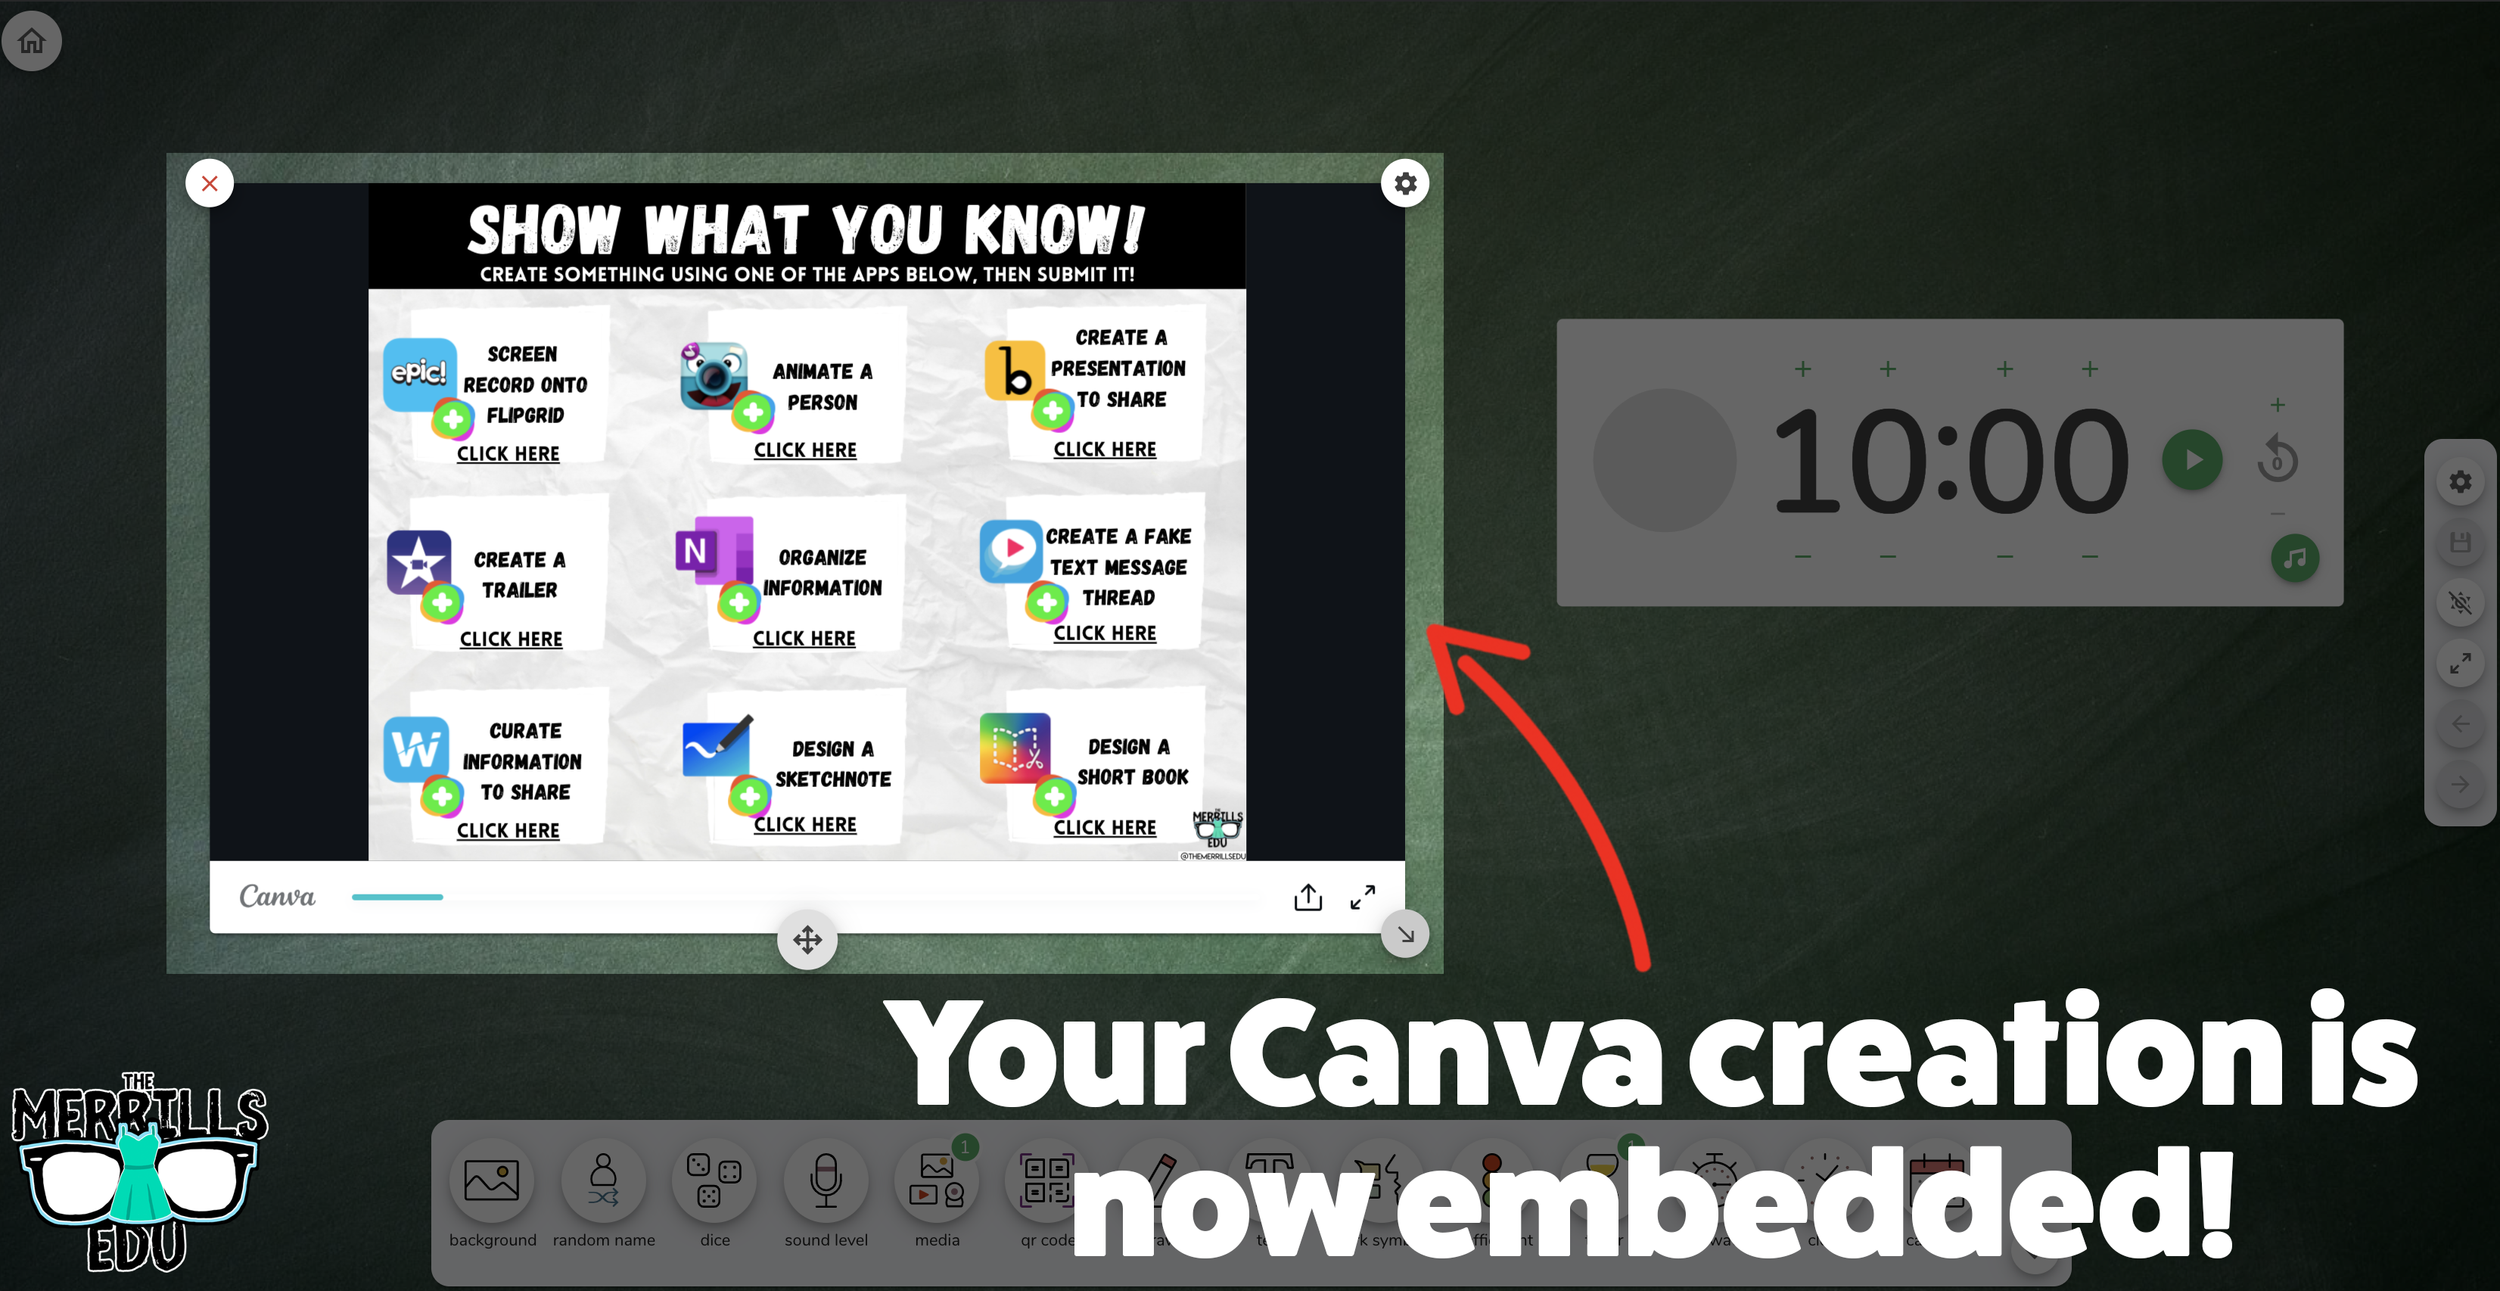 Canva_Embedded_into_Classroom_Screen_7.png